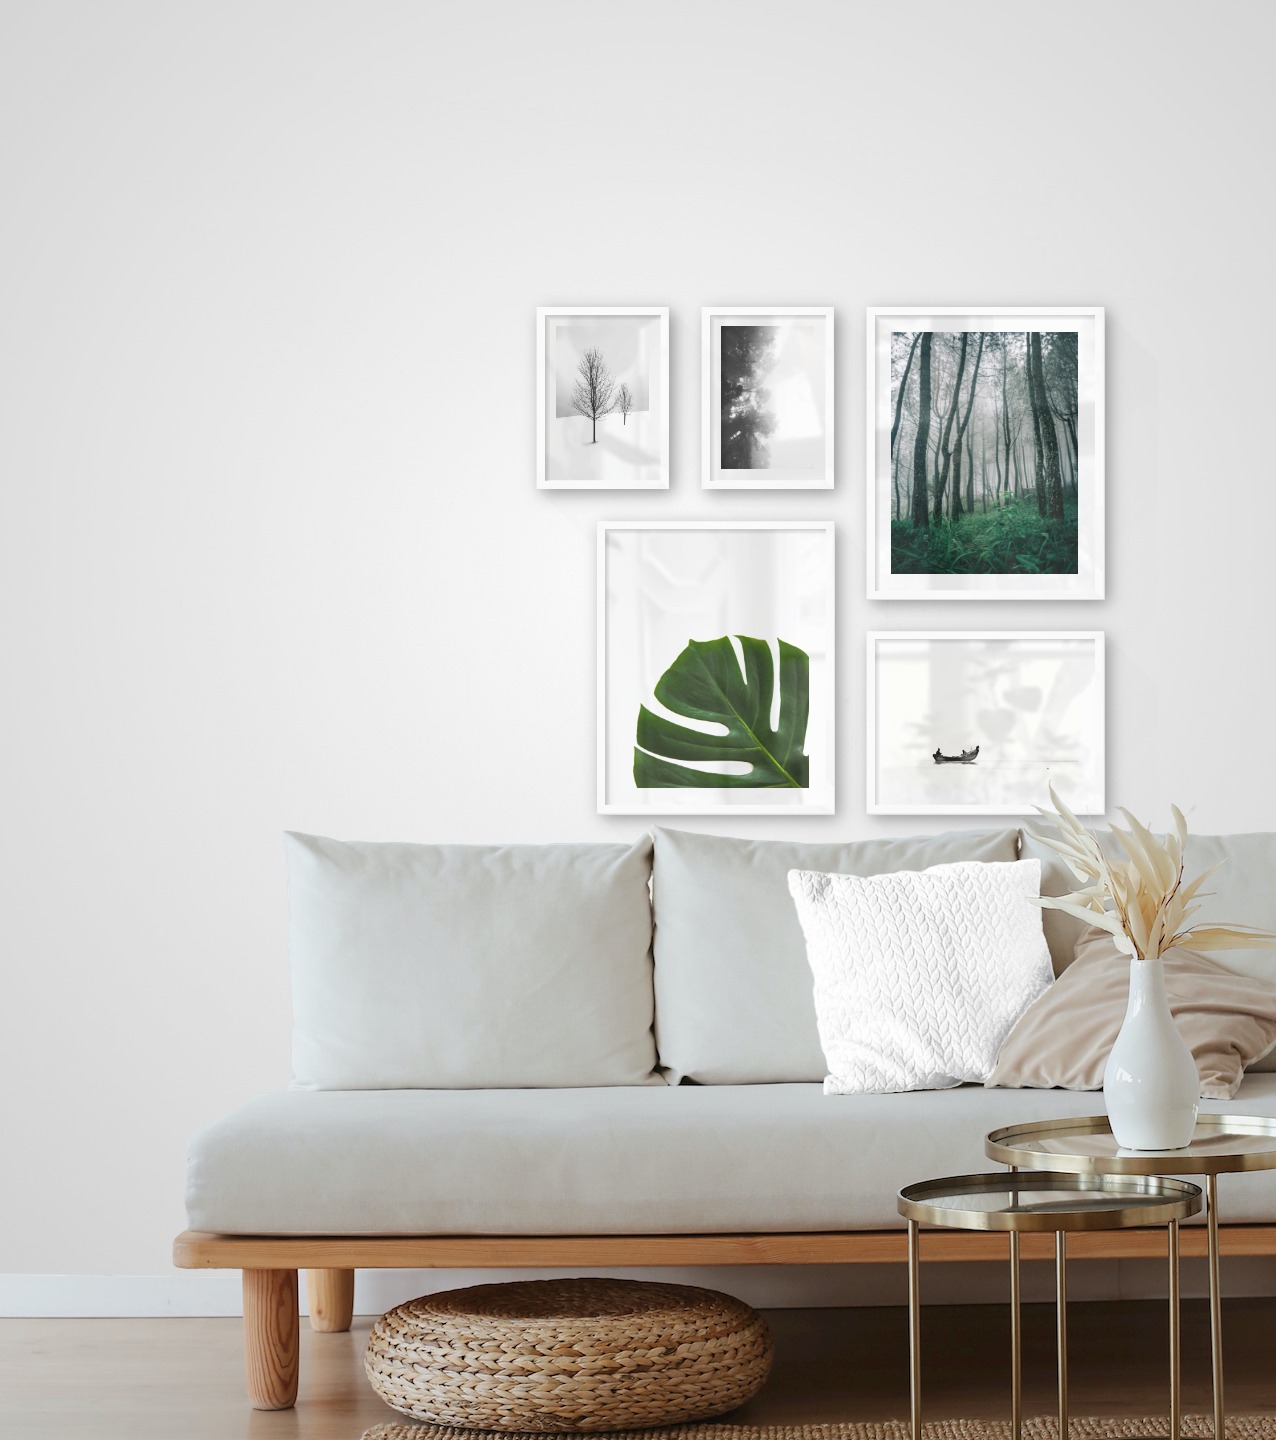 Gallery wall with picture frames in white in sizes 21x30, 40x50 and 30x40 with prints "Foggy wooden tops from the side", "Trees in the snow", "Plant", "Tall trees" and "People in boat"